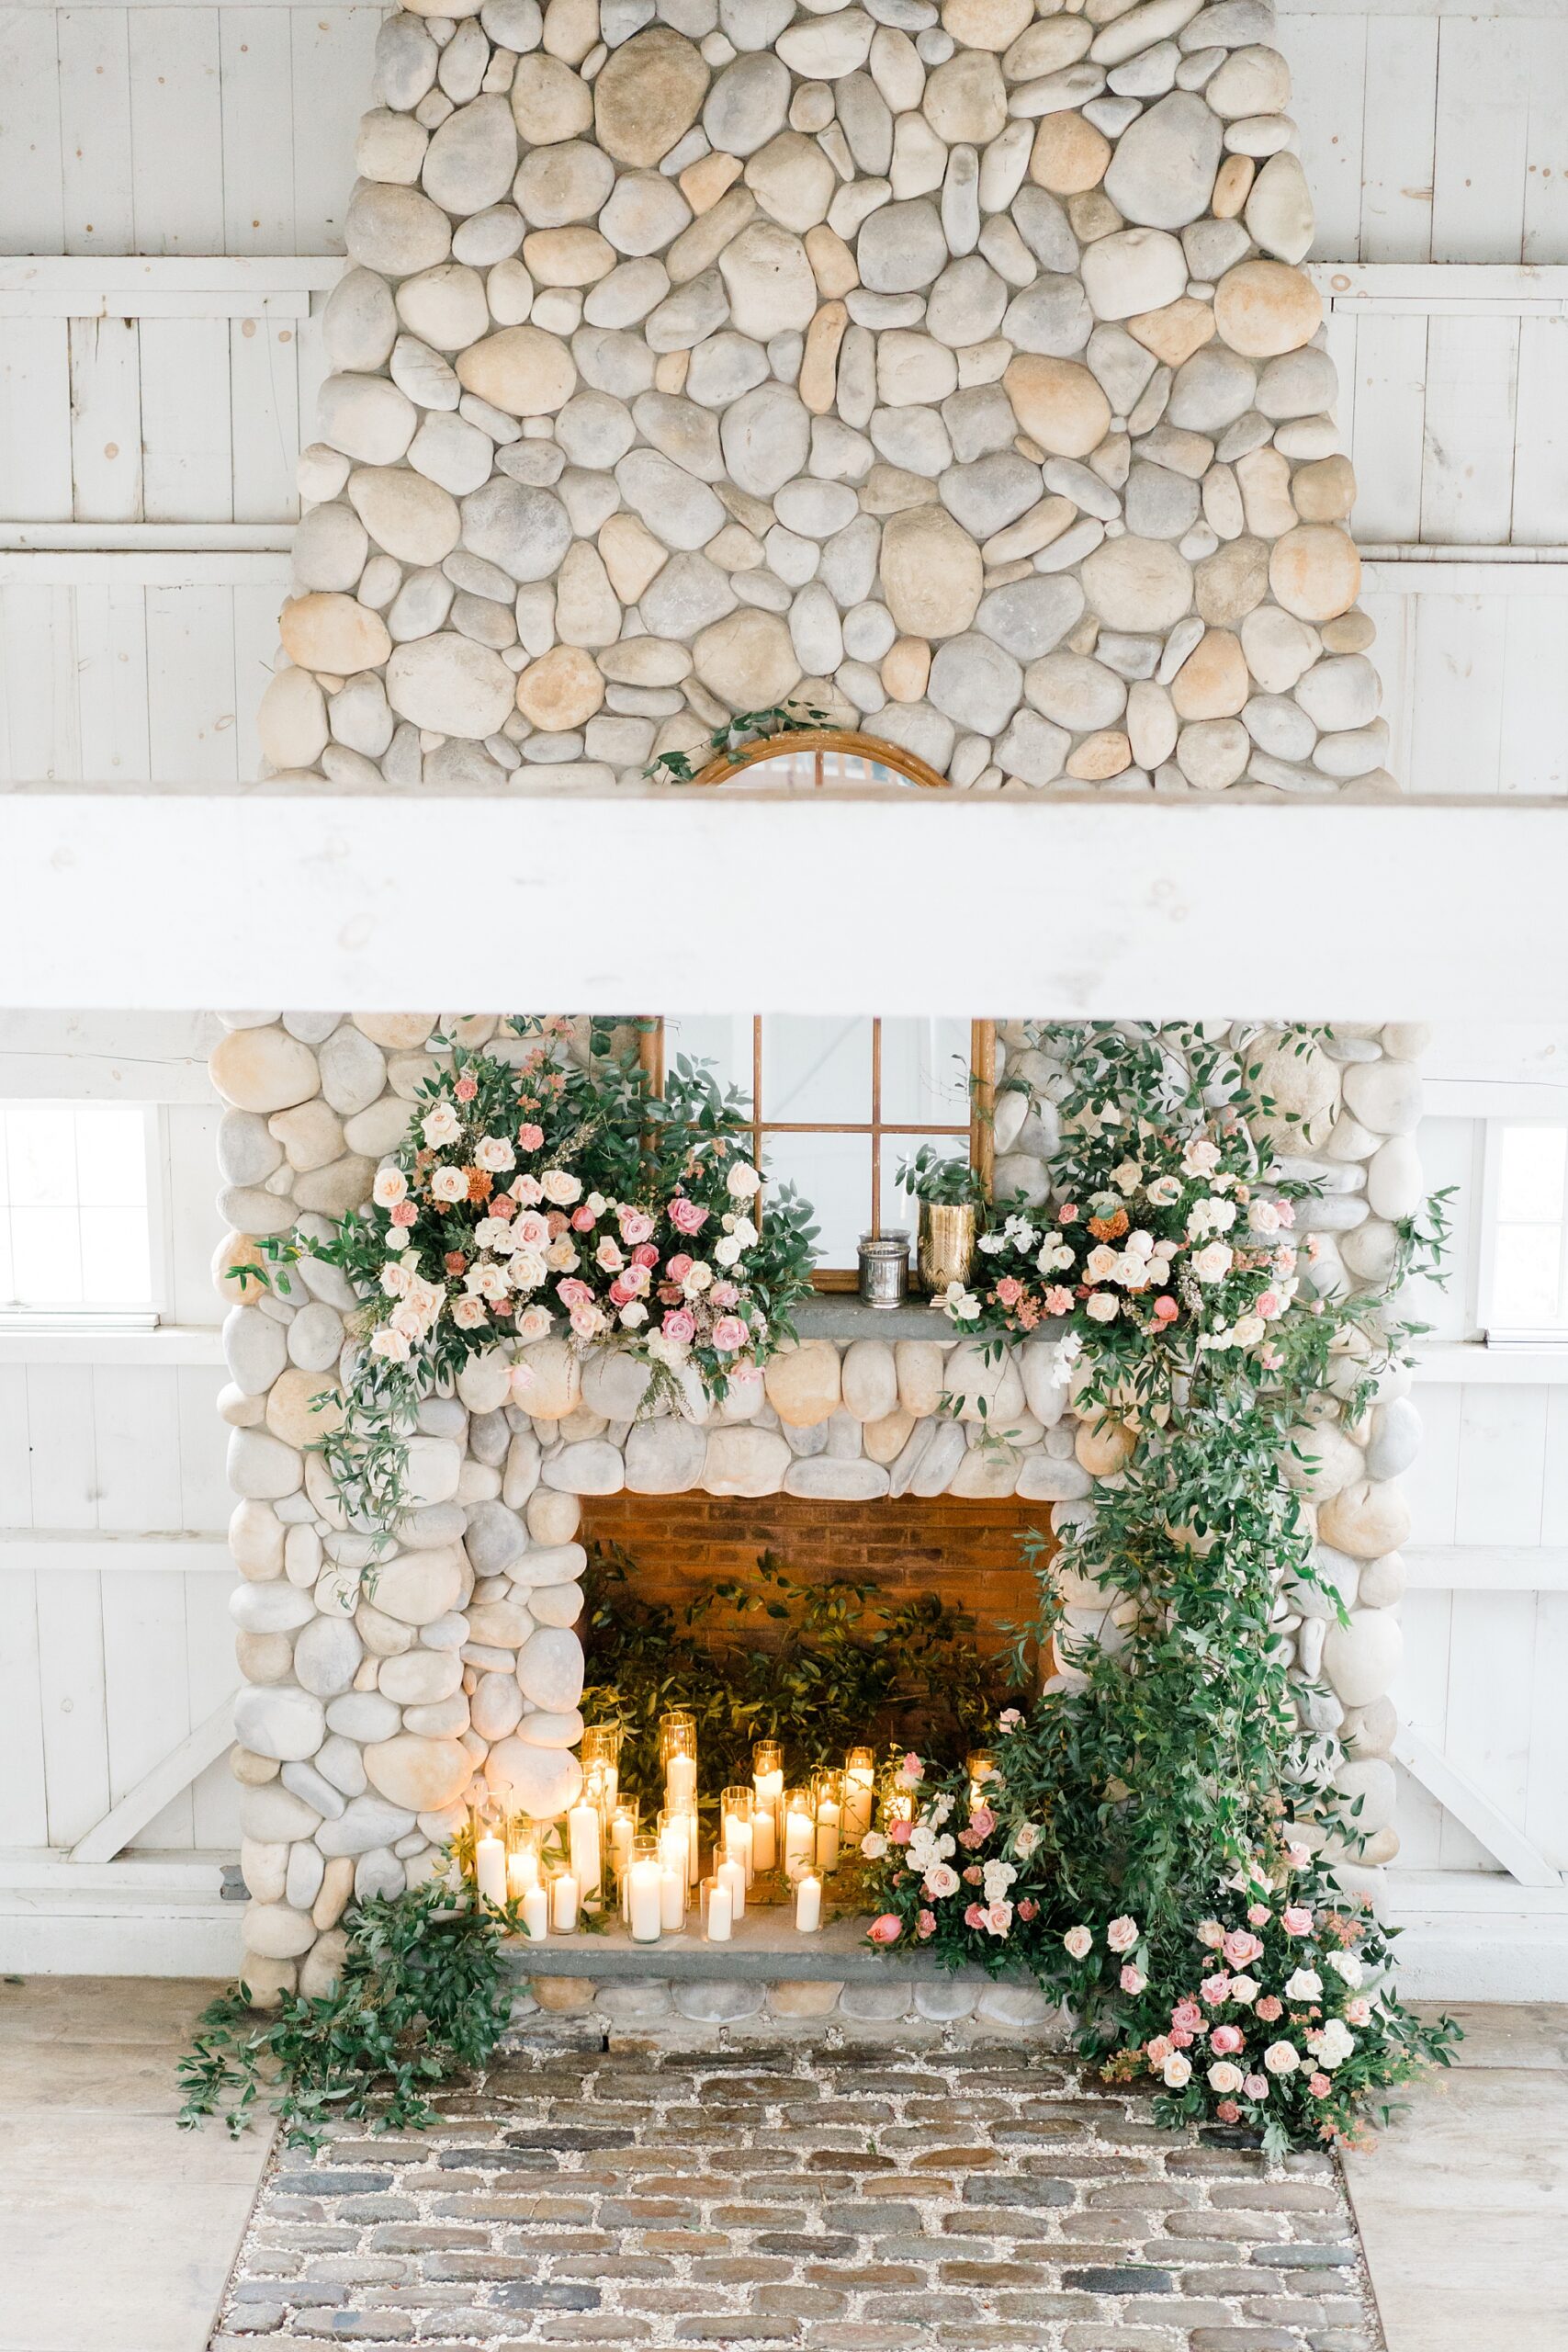 stunning stone fireplace decorated in lush greenery and pink and white flowers